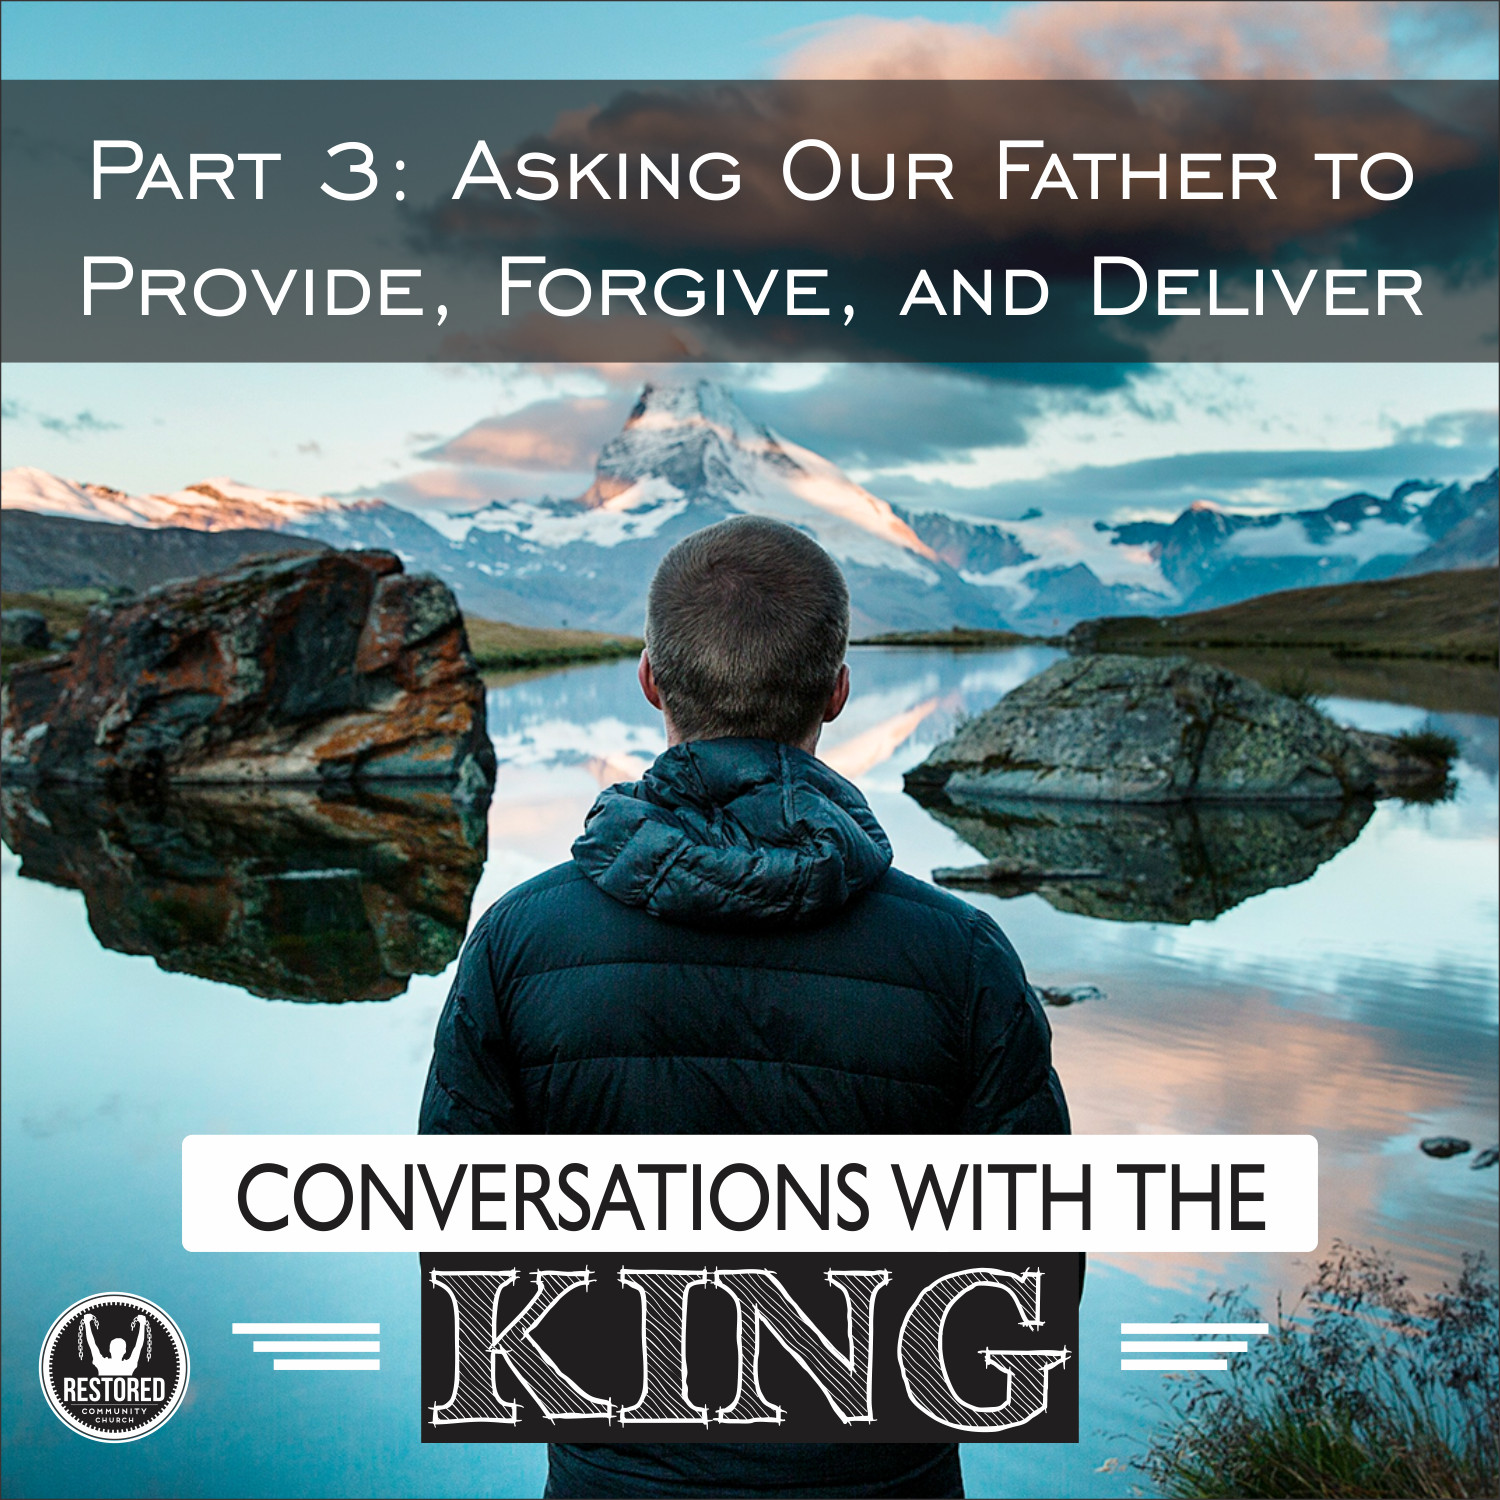 Conversations With the King - Part 3: Asking Our Father to Provide, Forgive, and Deliver